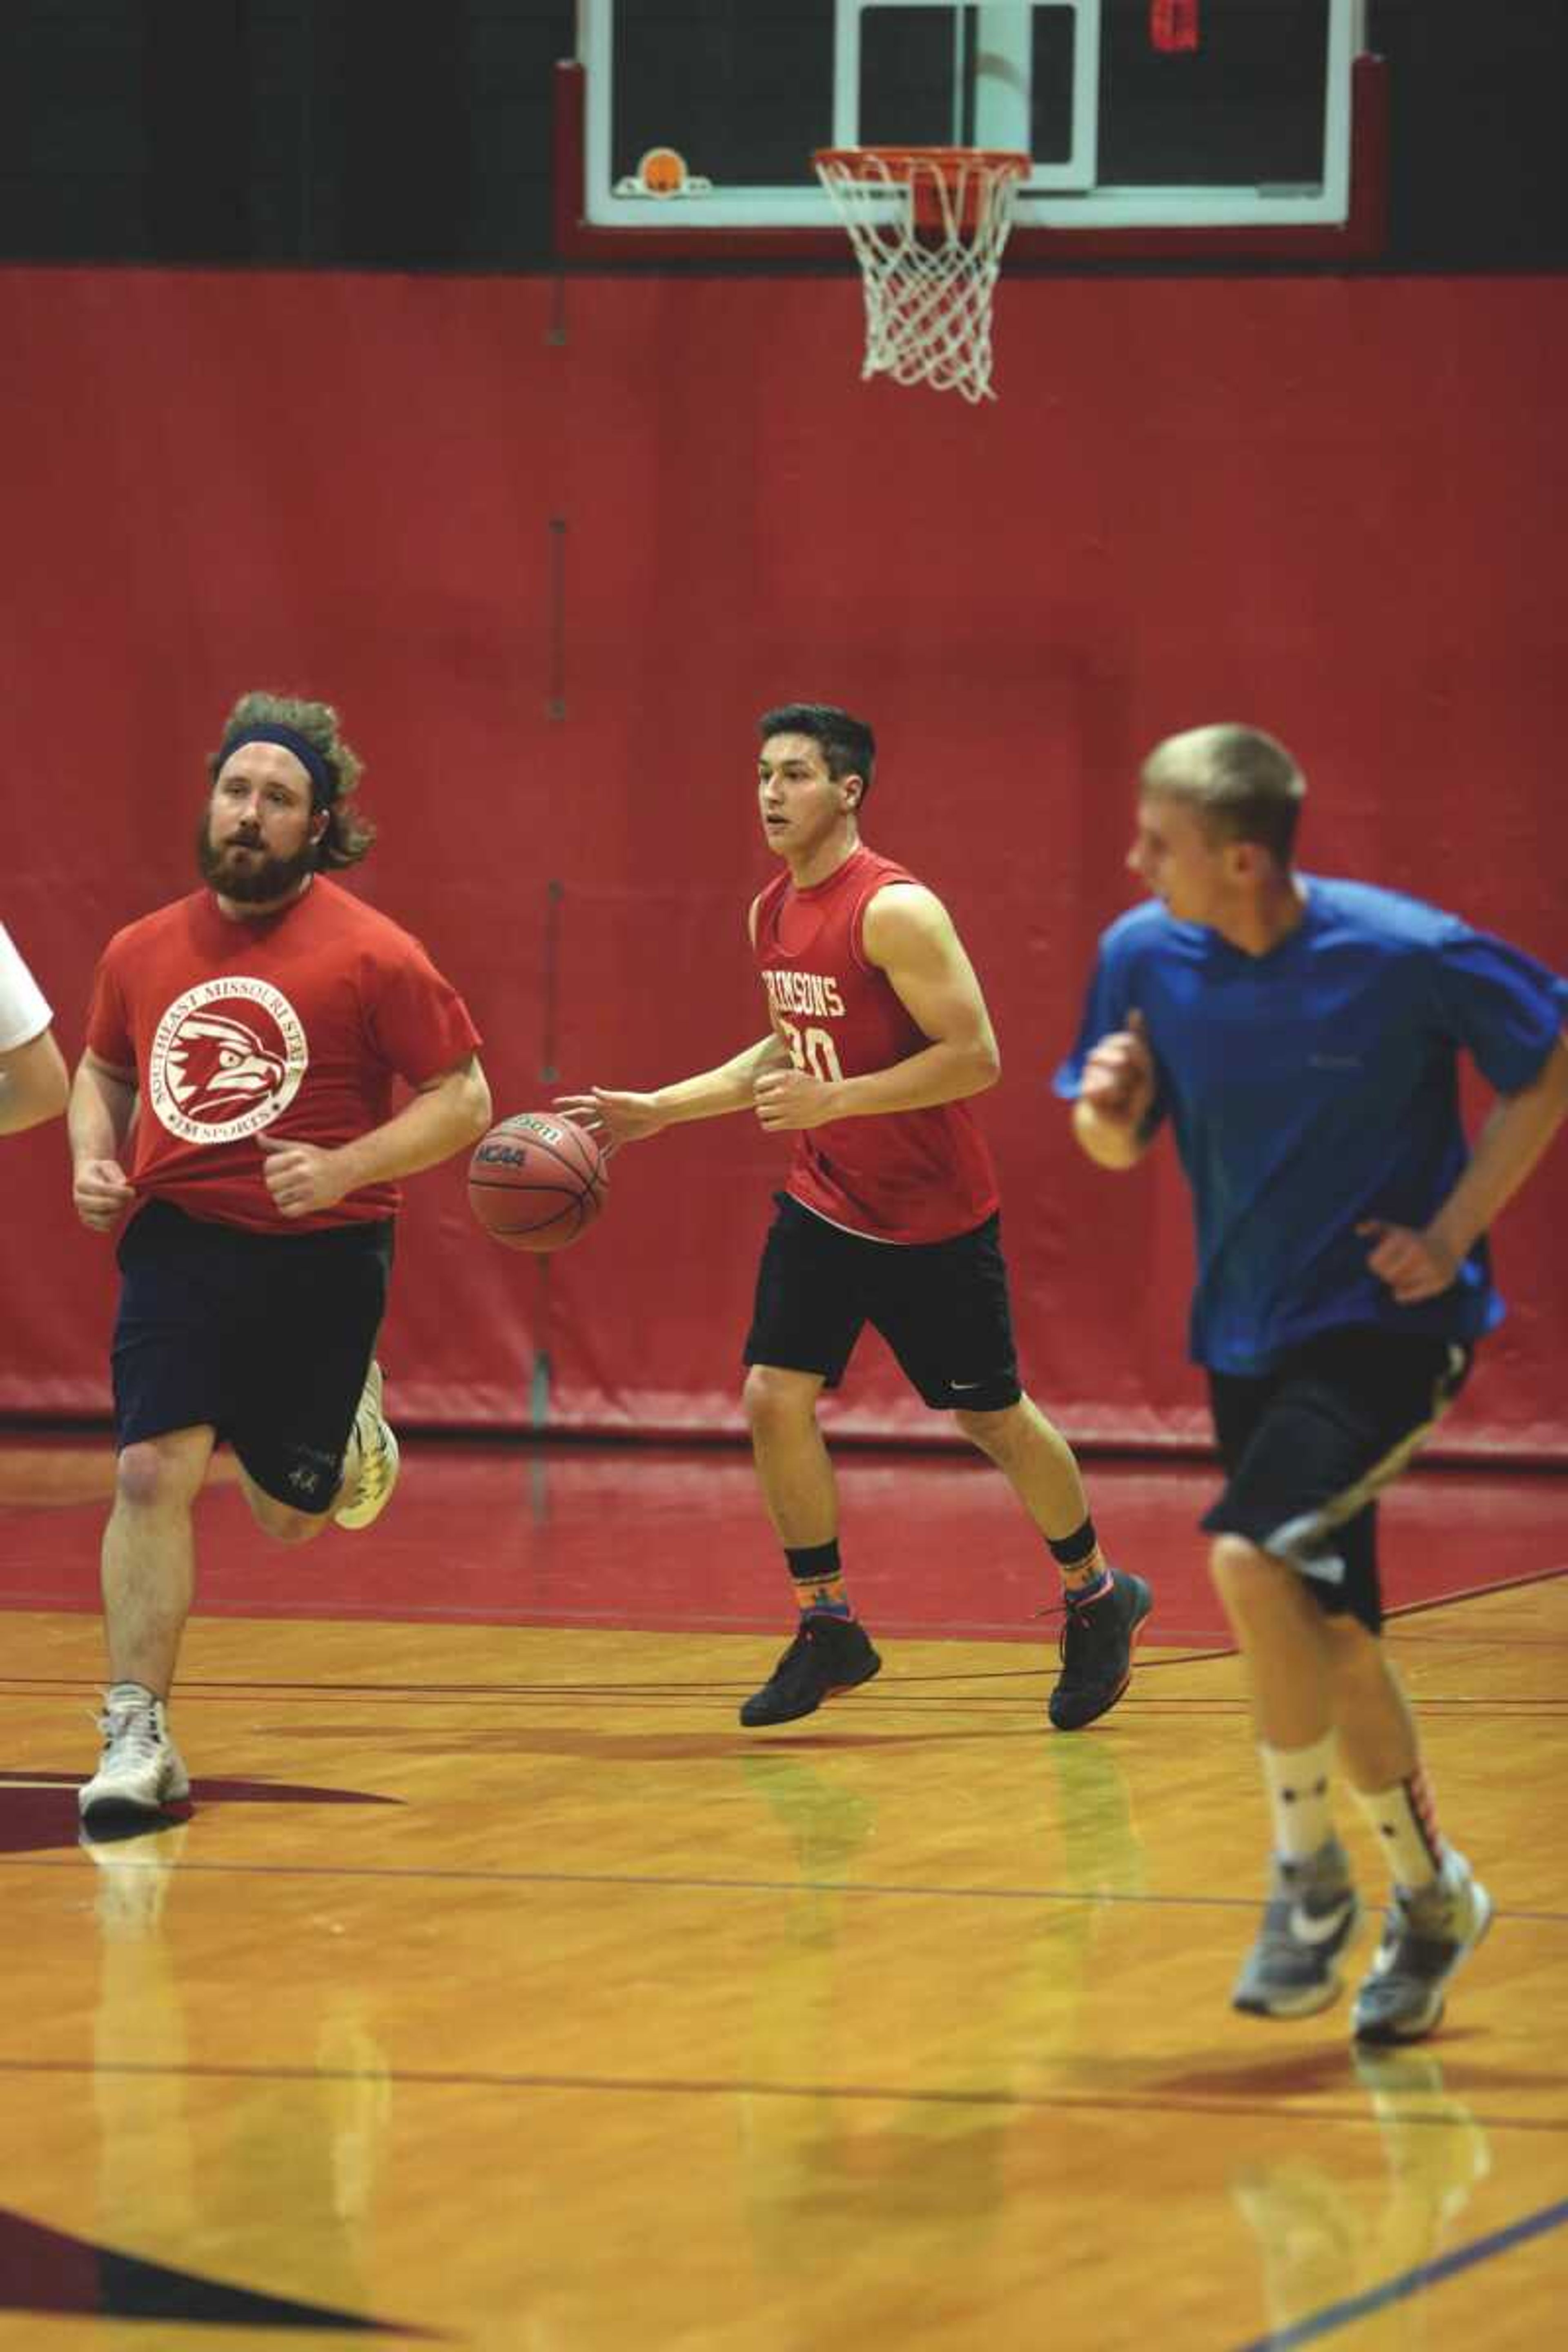 Intramural basketball players will have to adjust to new opponents for postseason play.